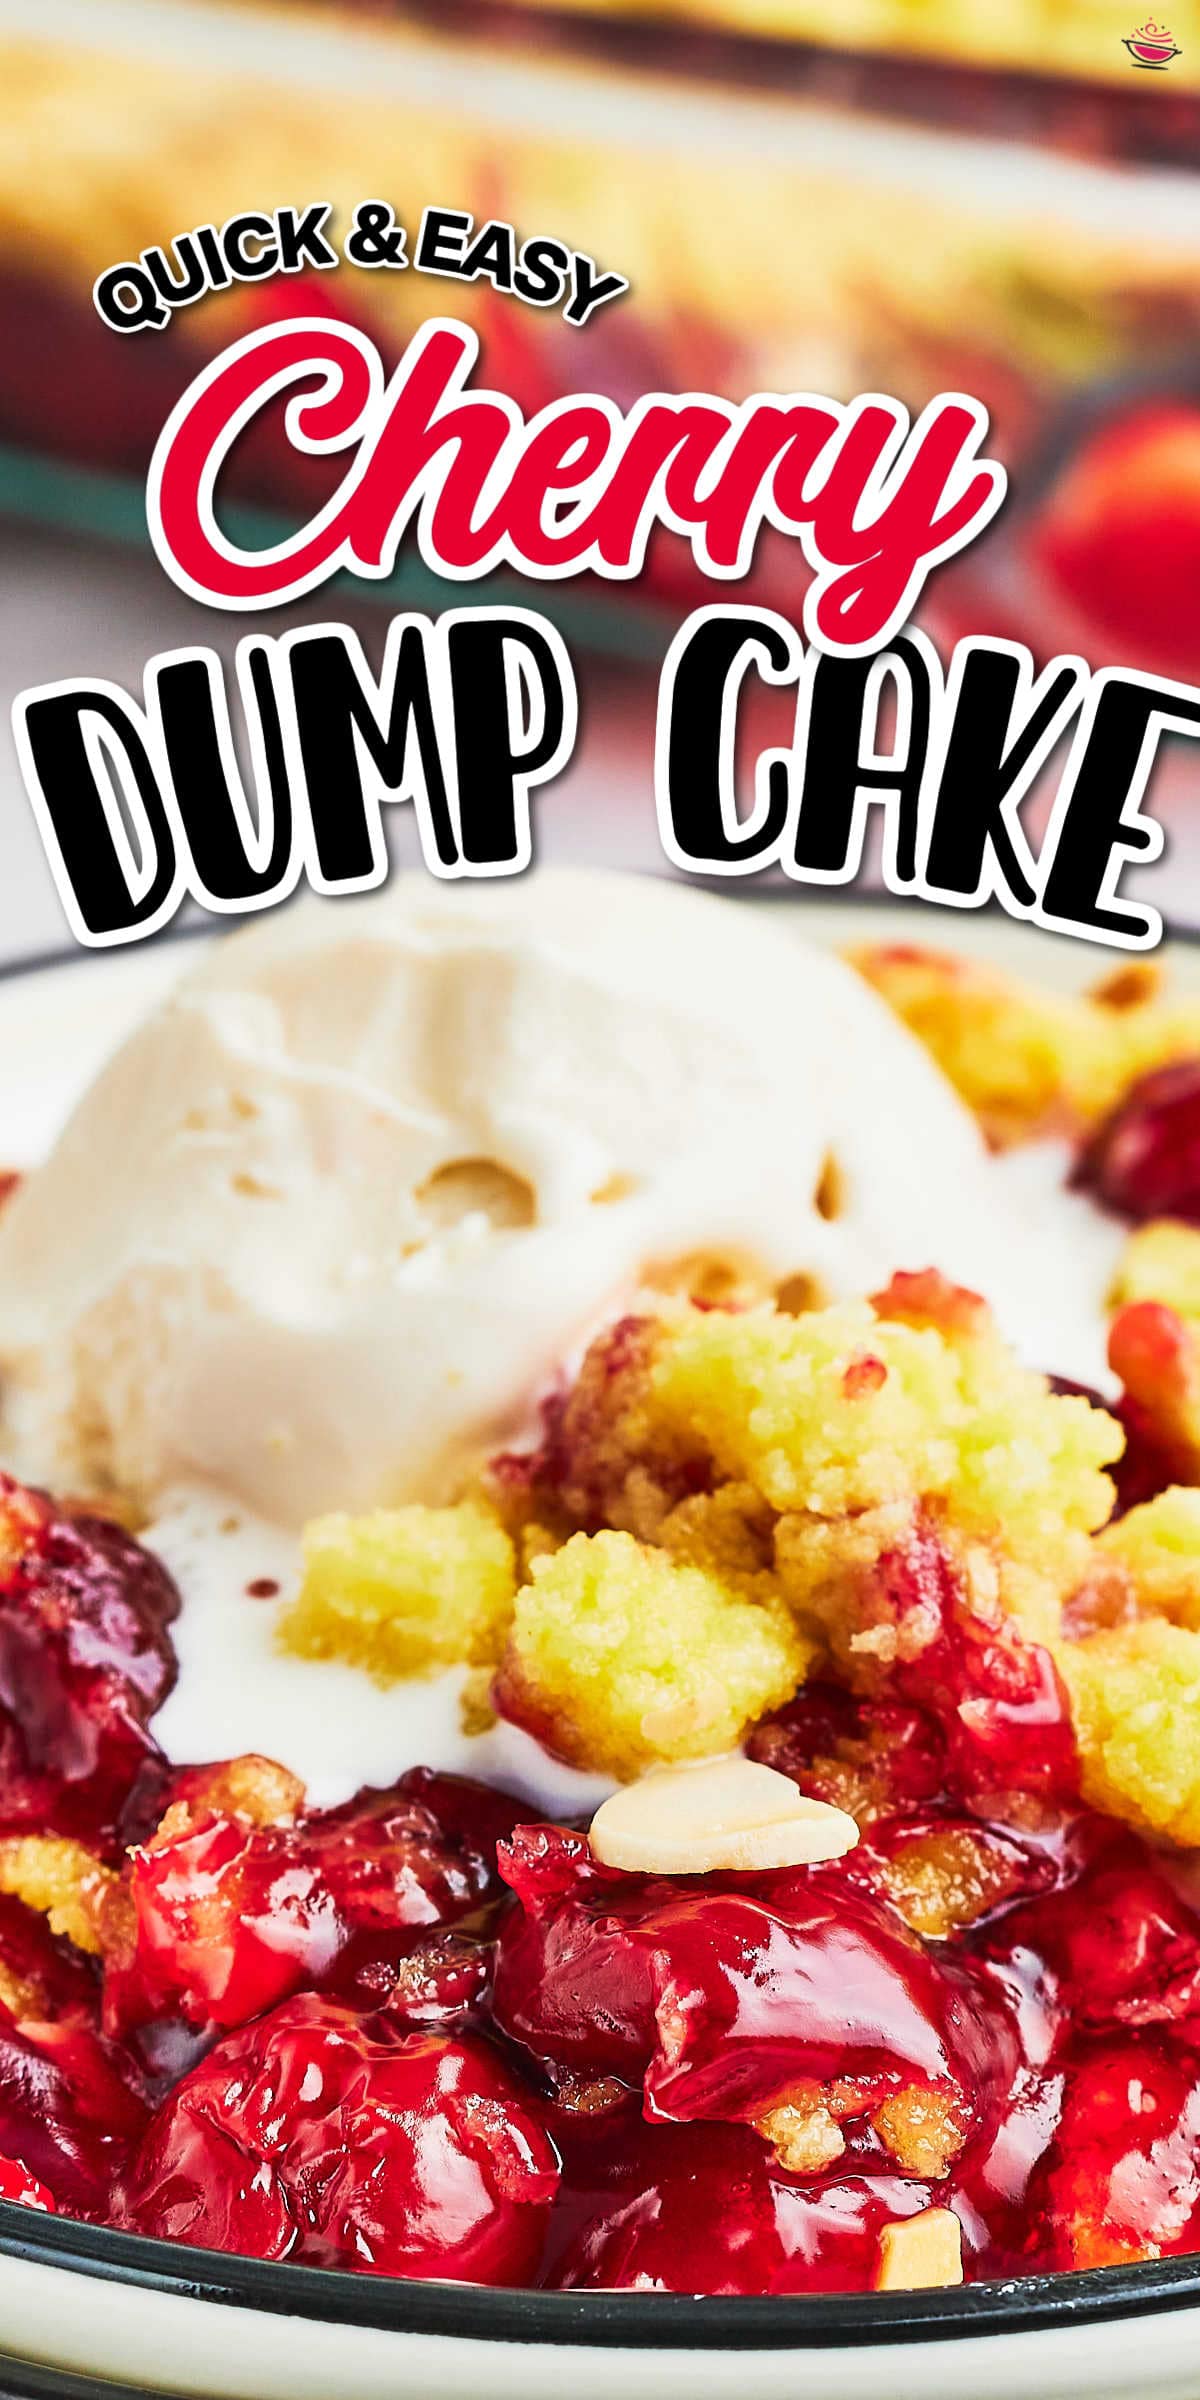 🍒 Easy Cherry Dump Cake Recipe 🍰: Whip up this irresistible dessert in no time! Layers of cherry pie filling, yellow cake mix, and melted butter create a delightful treat perfect for any occasion. Optional nuts add a crunchy twist. Save now for your next gathering! #cheerfulcook #CherryDumpCake #easydessert via @cheerfulcook